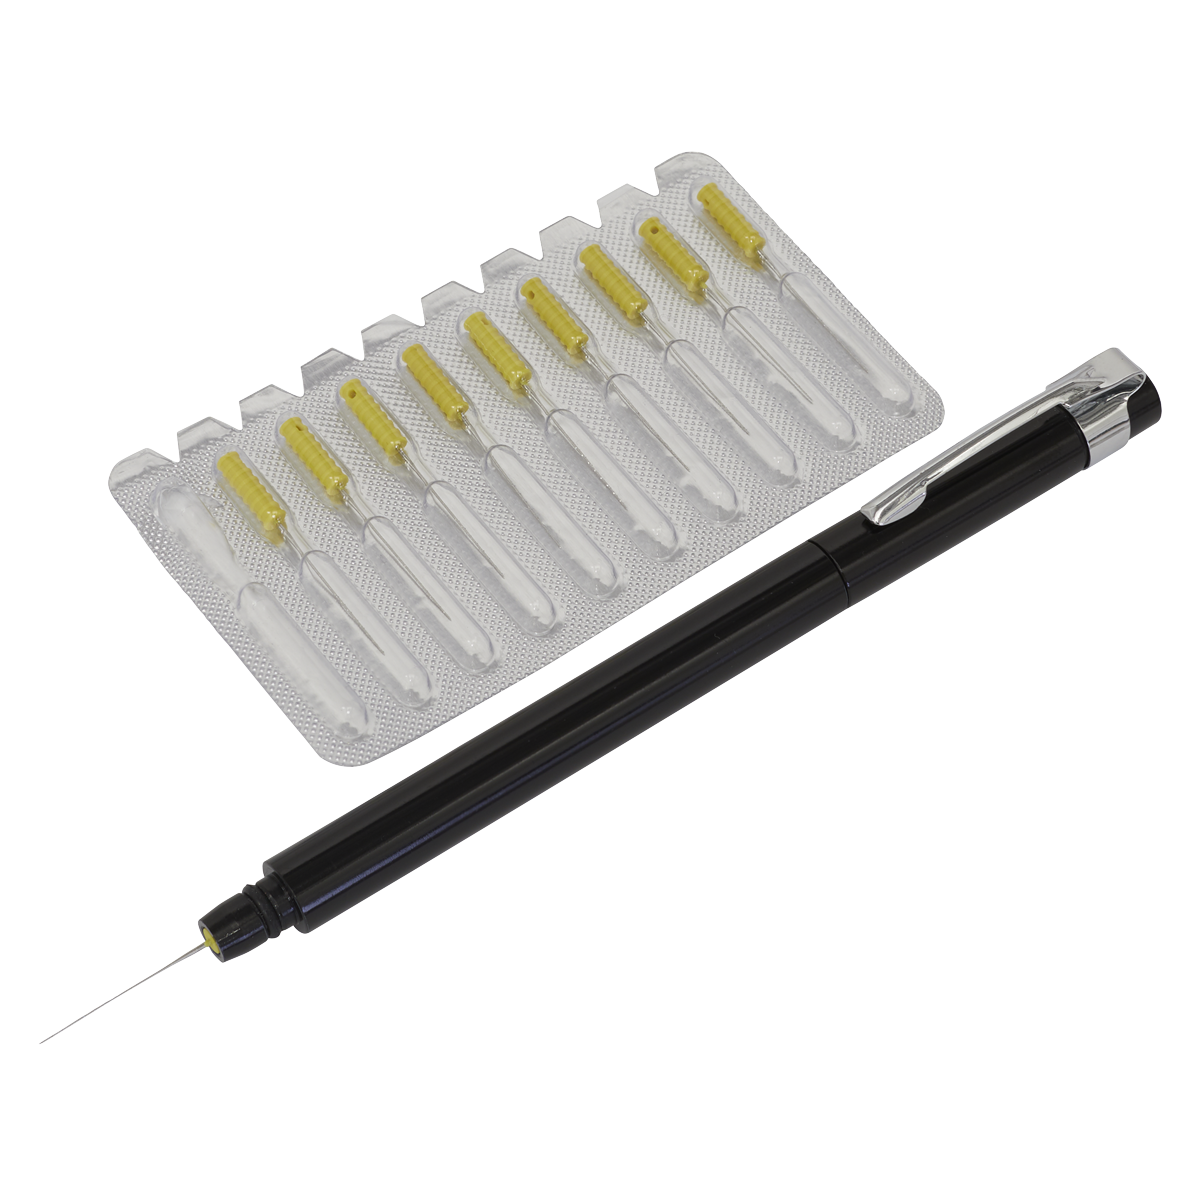 Sealey MK78 Paint Dirt Removal Pen with Needle Set